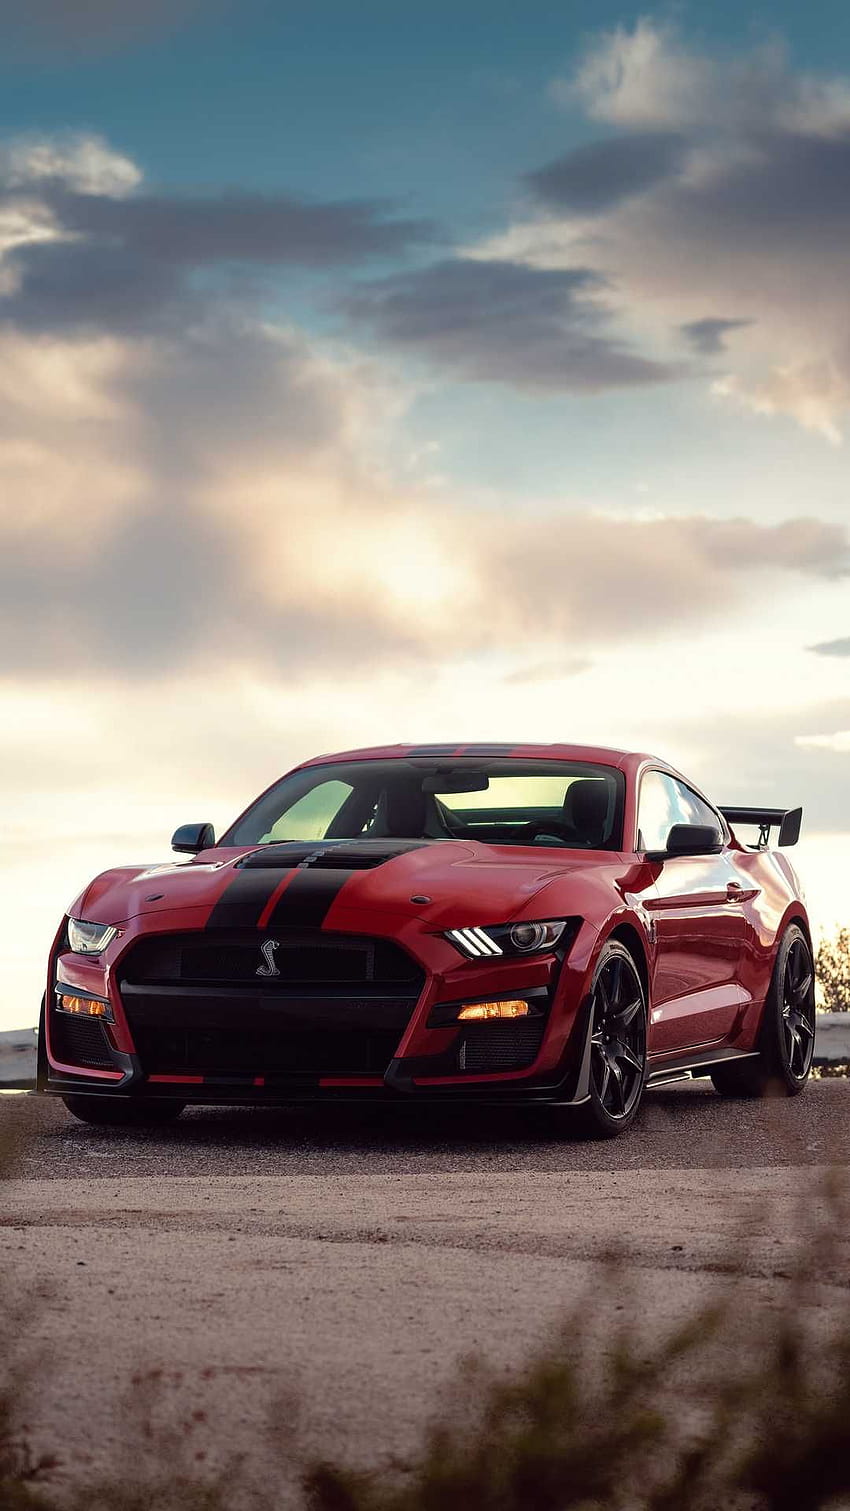 Neu, 2020 Ford Mustang Shelby GT500, roter Frontwinkel, 2020 Ford Mustang GT500 iPhone HD-Handy-Hintergrundbild